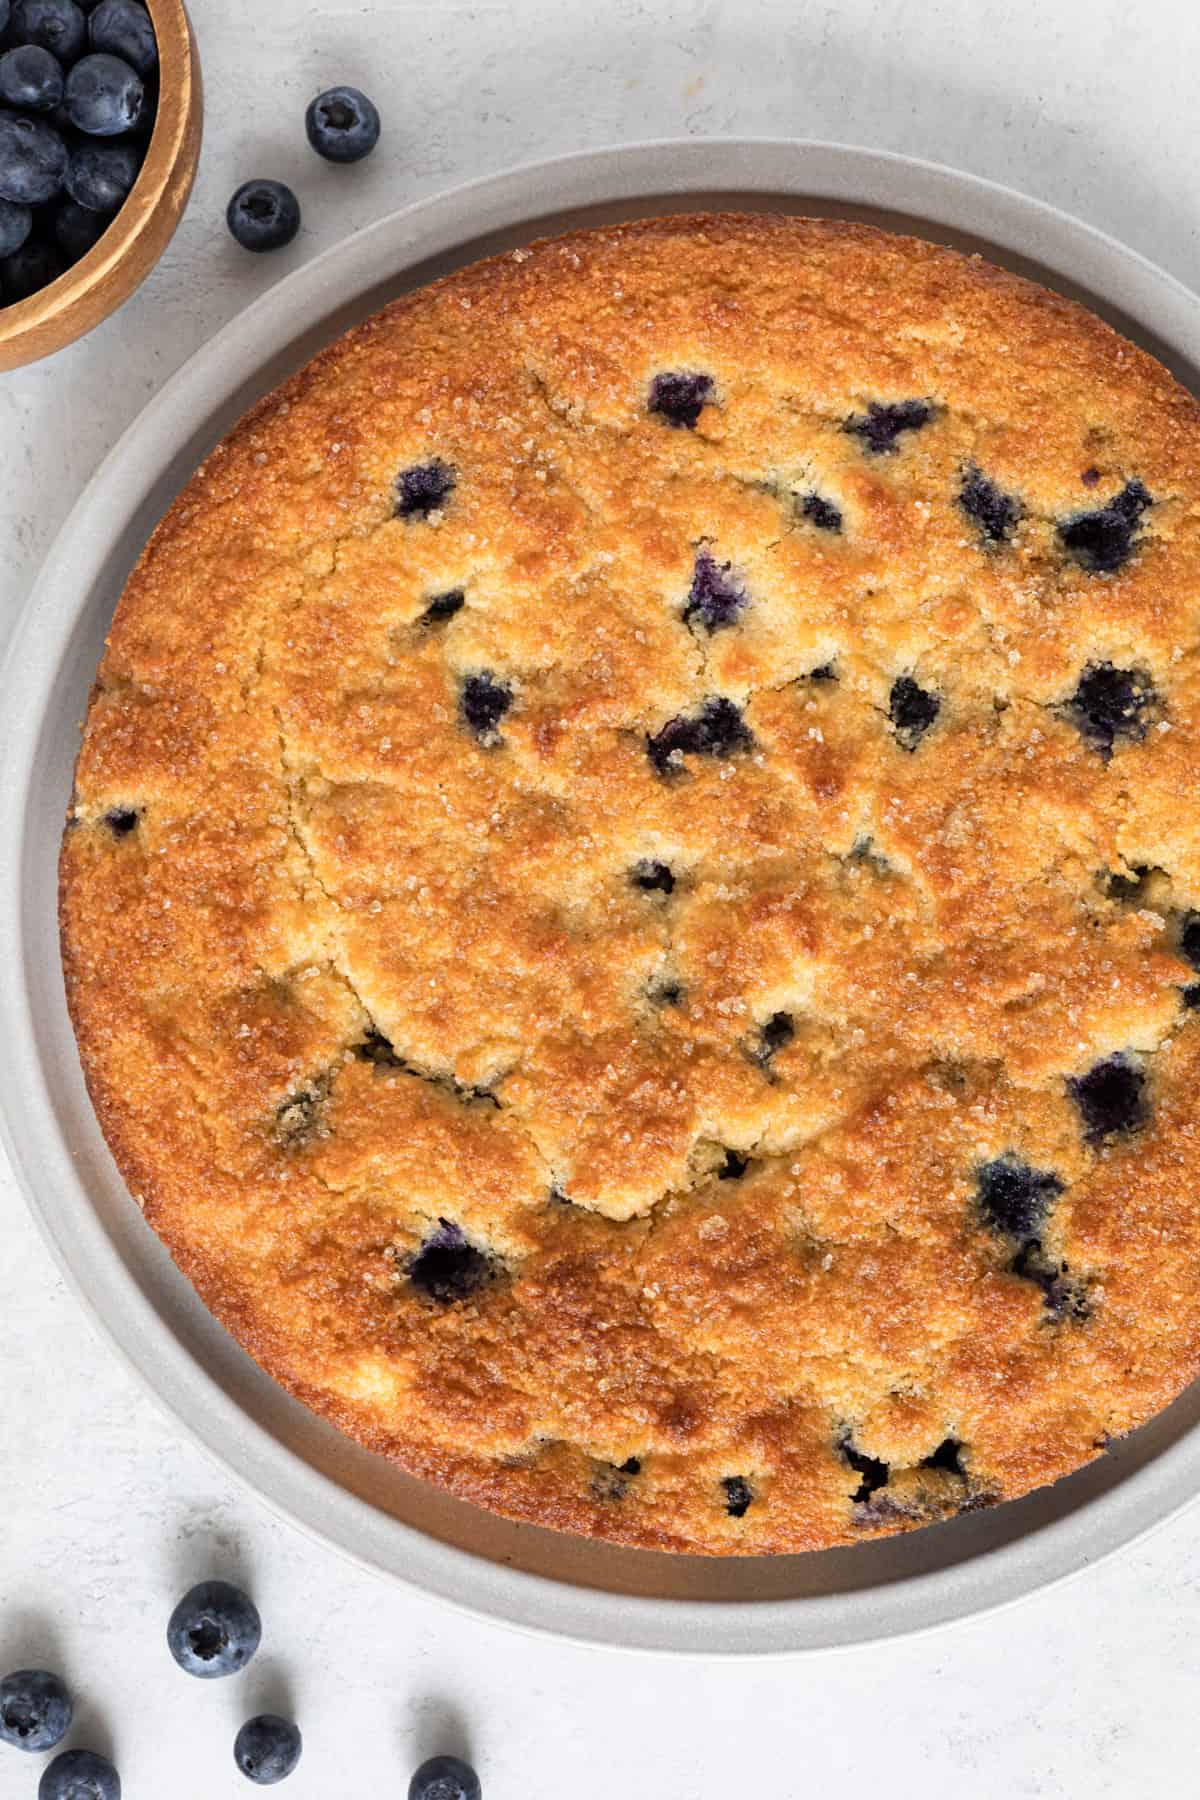 A whole low carb blueberry cake on a large plate.